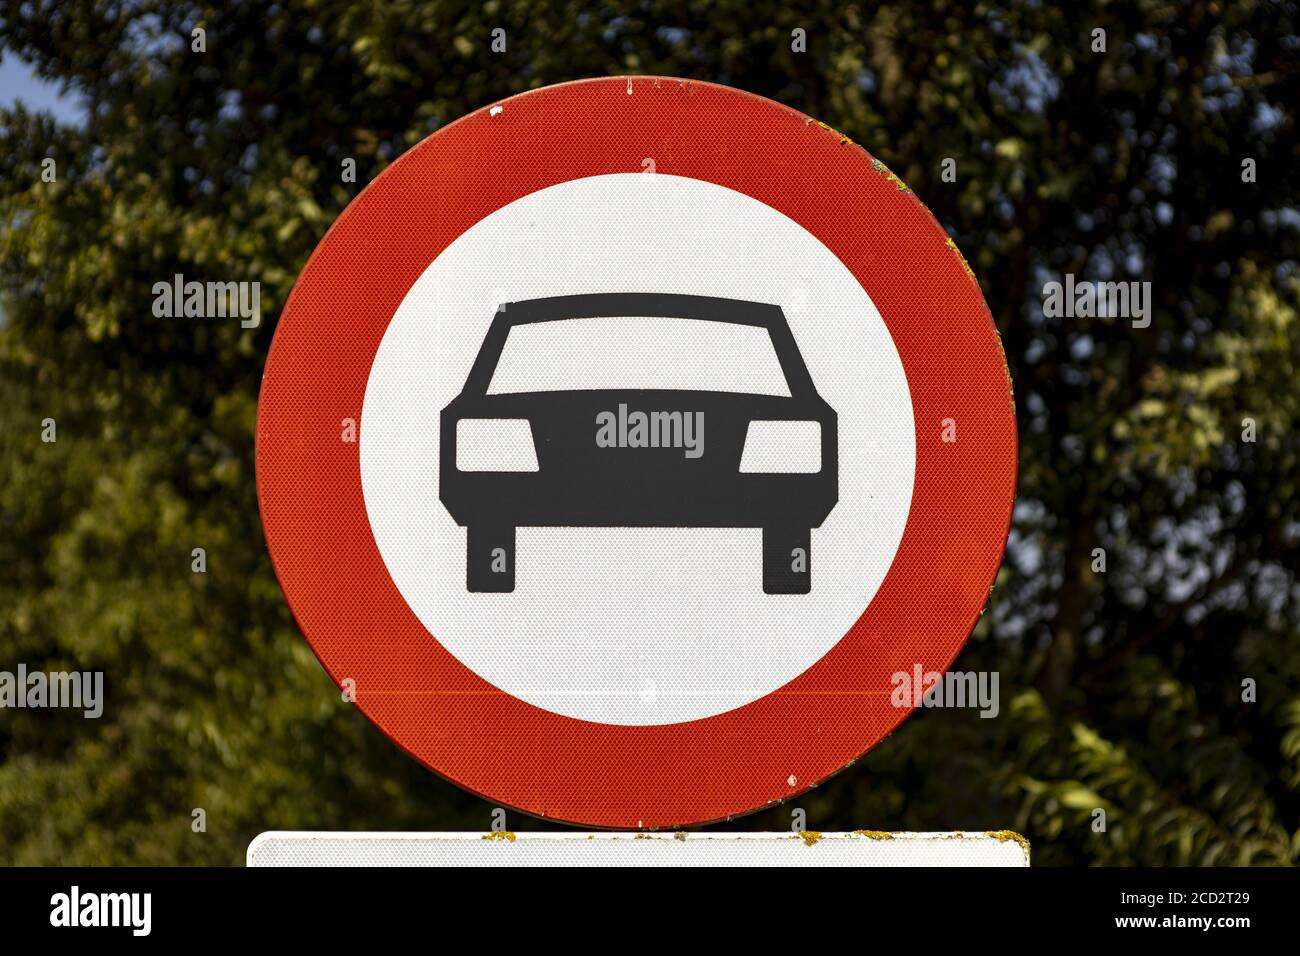 HOGE HEXEL, NETHERLANDS - Jul 29, 2020: Dutch traffic sign showing a car meaning no entry for personal vehicles Stock Photo